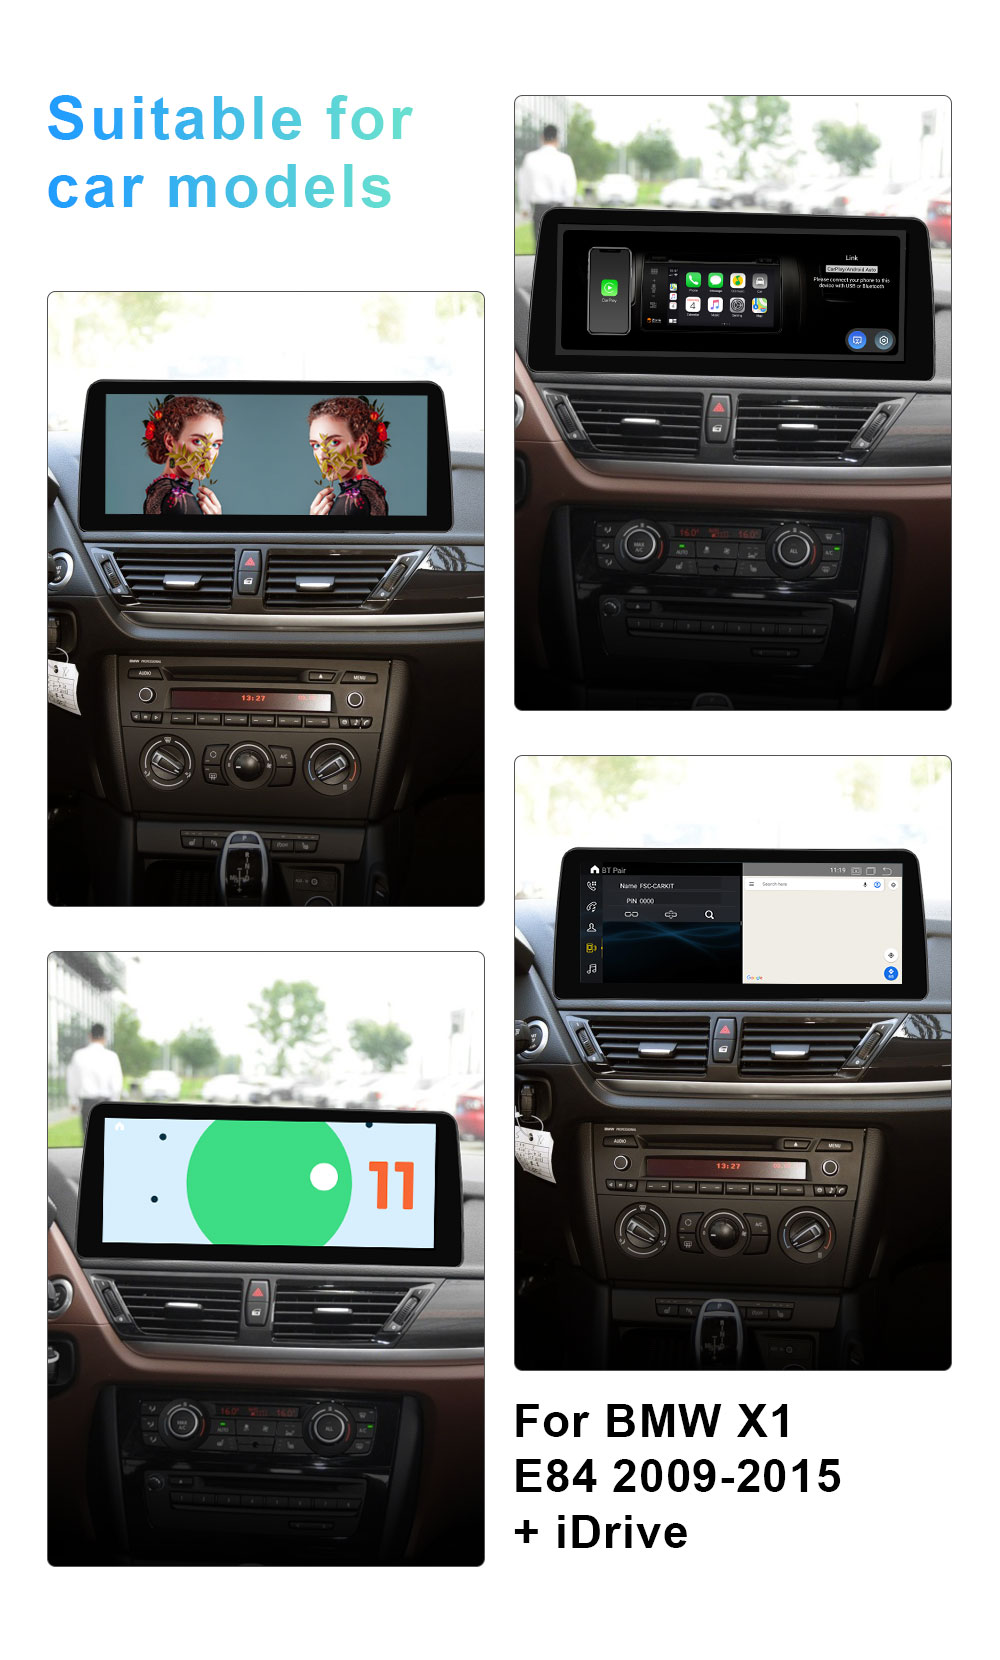 For BMW X1 E84 2009-2015 Android 12.3\